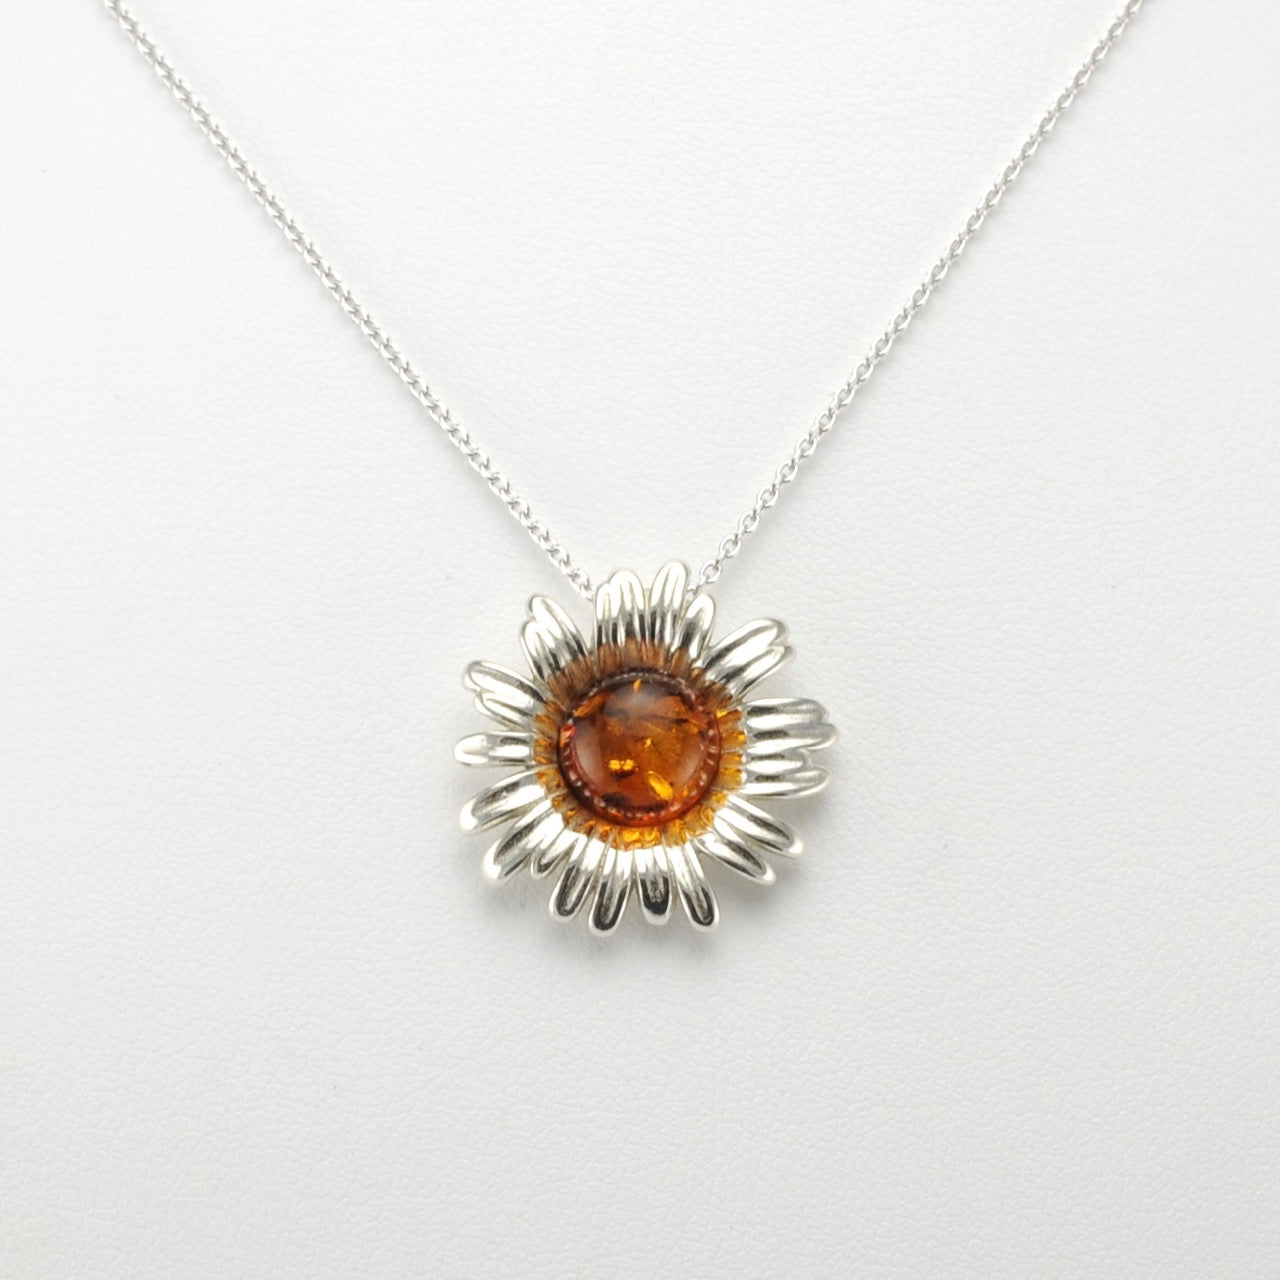 Silver Baltic Amber Daisy Necklace